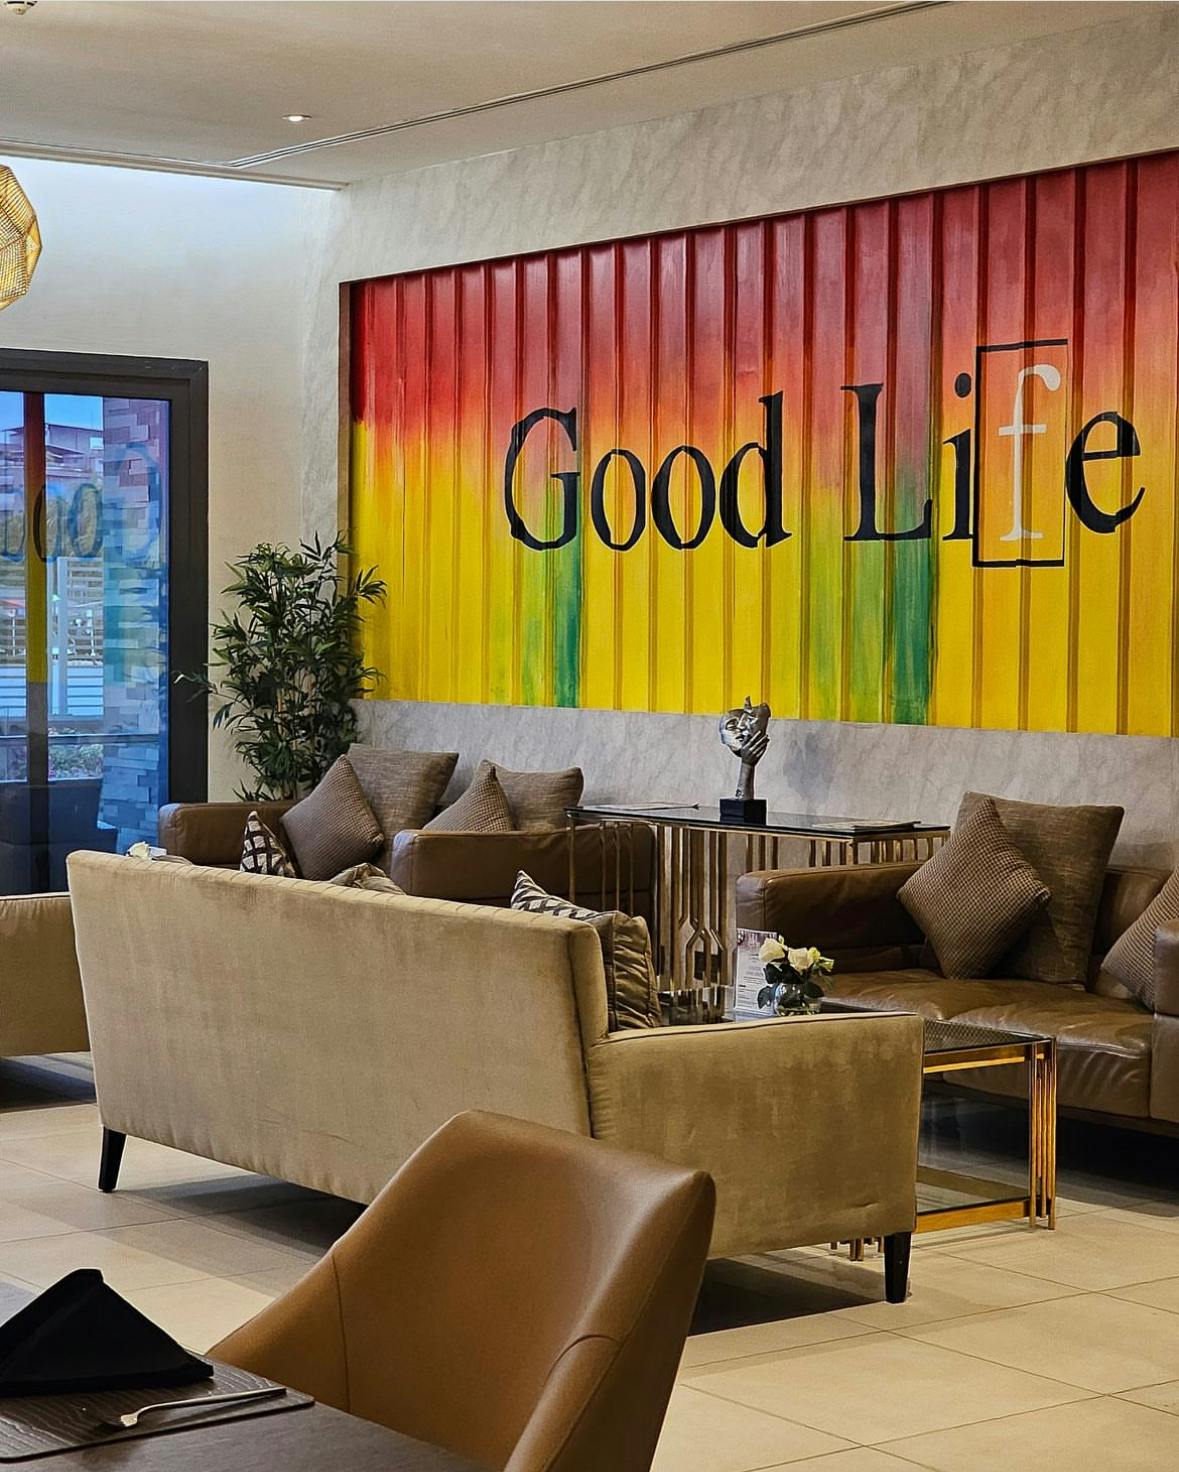 Image 3 of The GoodLife Cafe